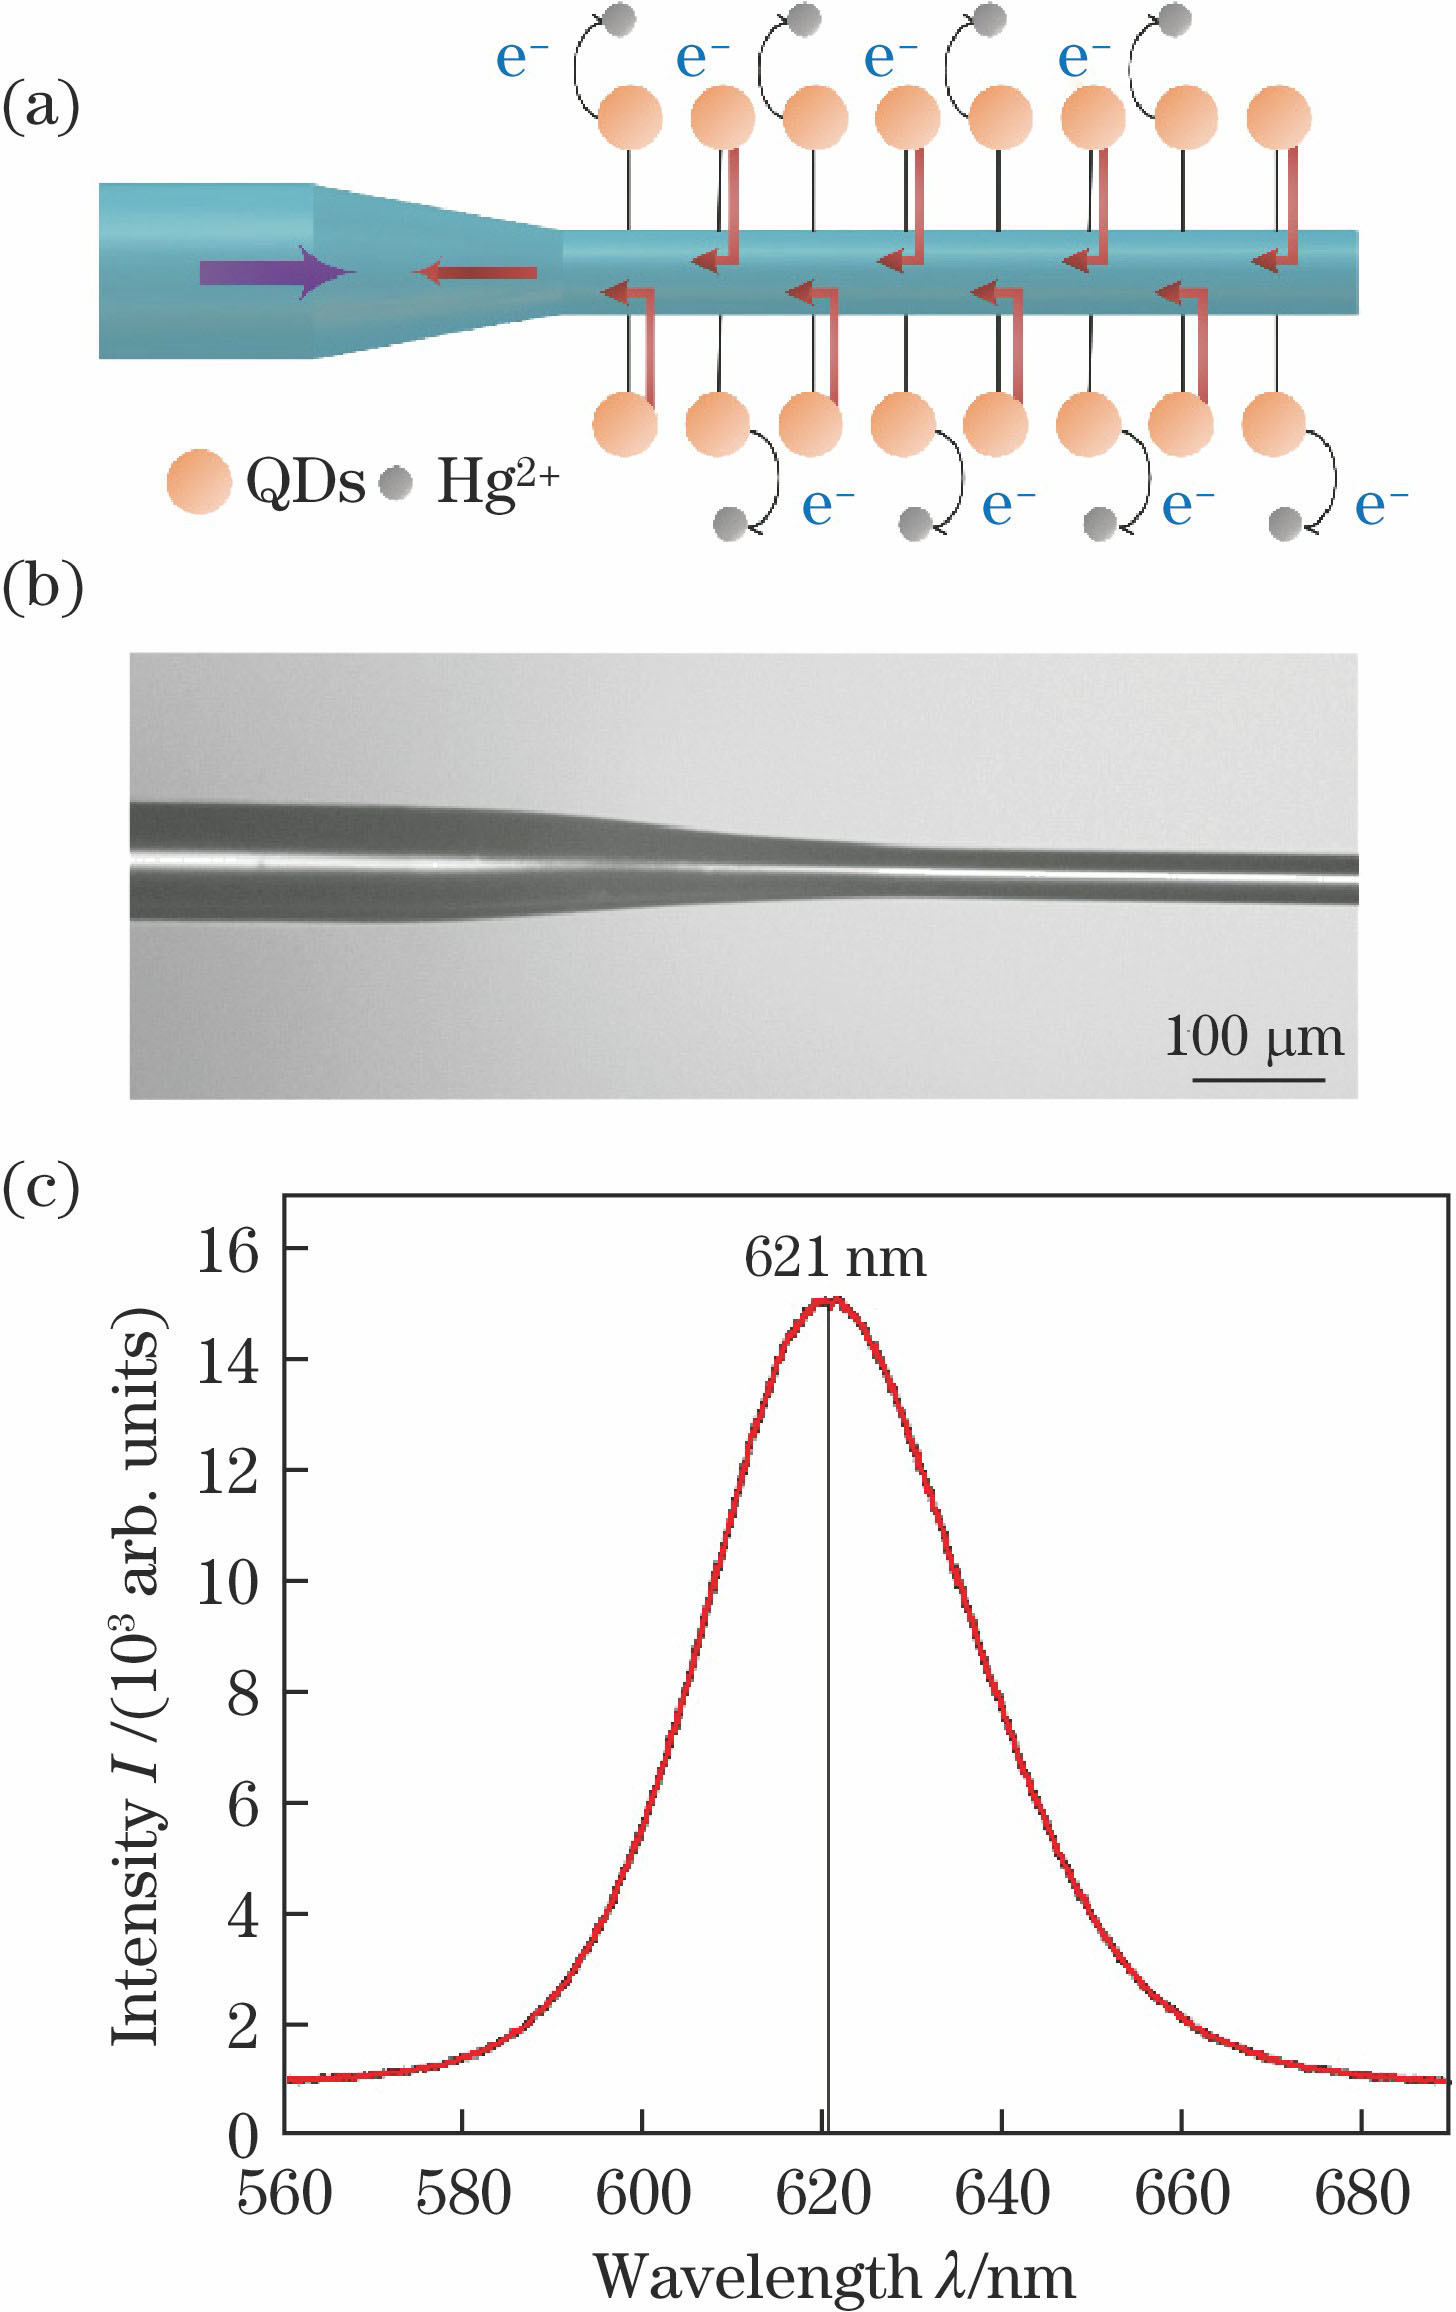 (a) Principle of Hg2+ detection; (b) micrograph of combined taper-and-cylinder optical fiber probe; (c) emission spectrum of CdSe/ZnS quantum dots